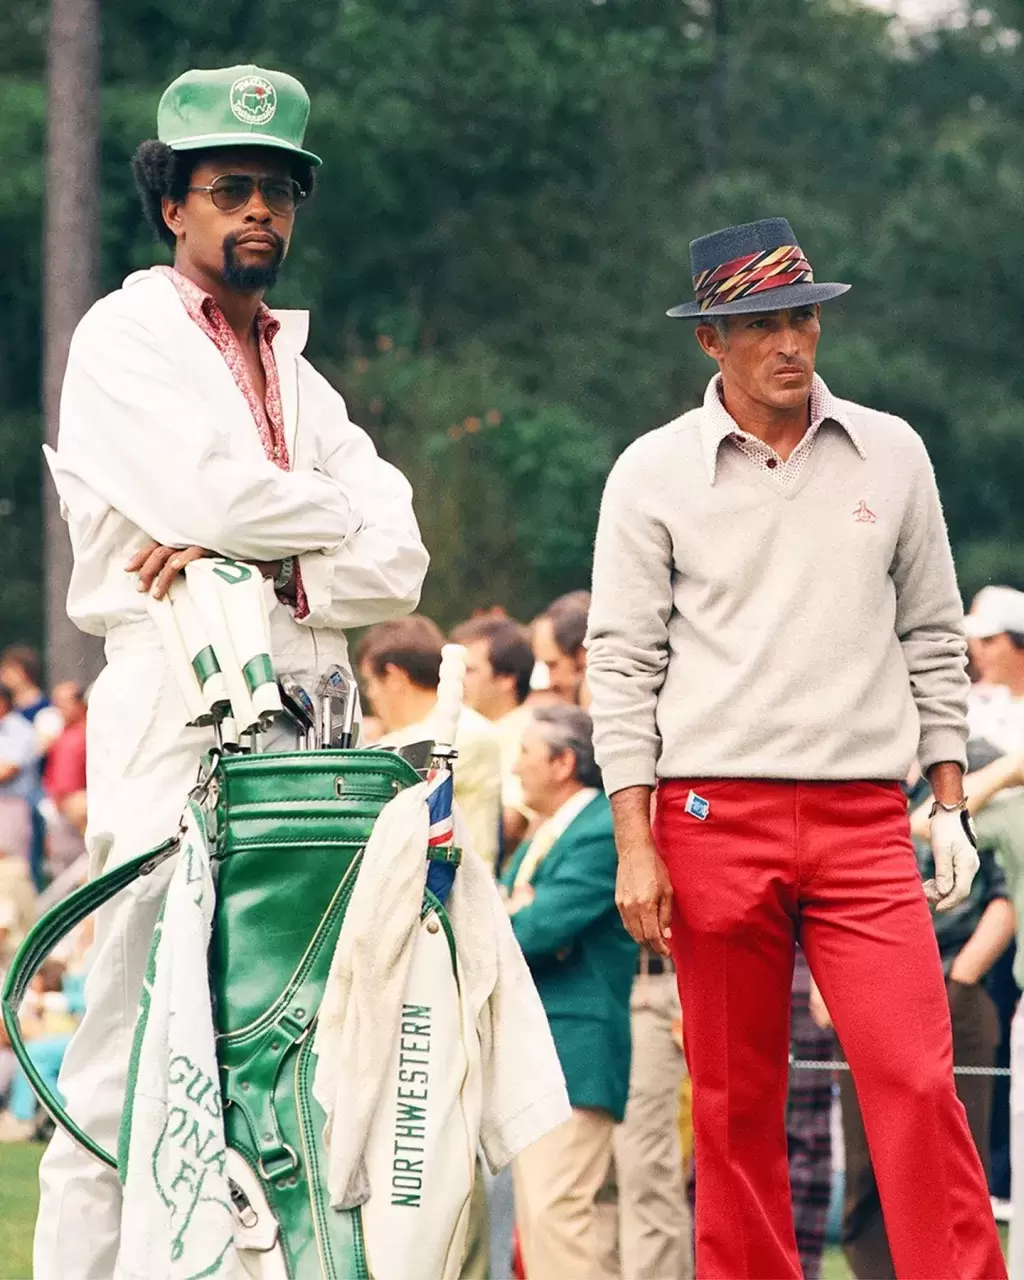 Chi Chi Rodriguez walks and swings